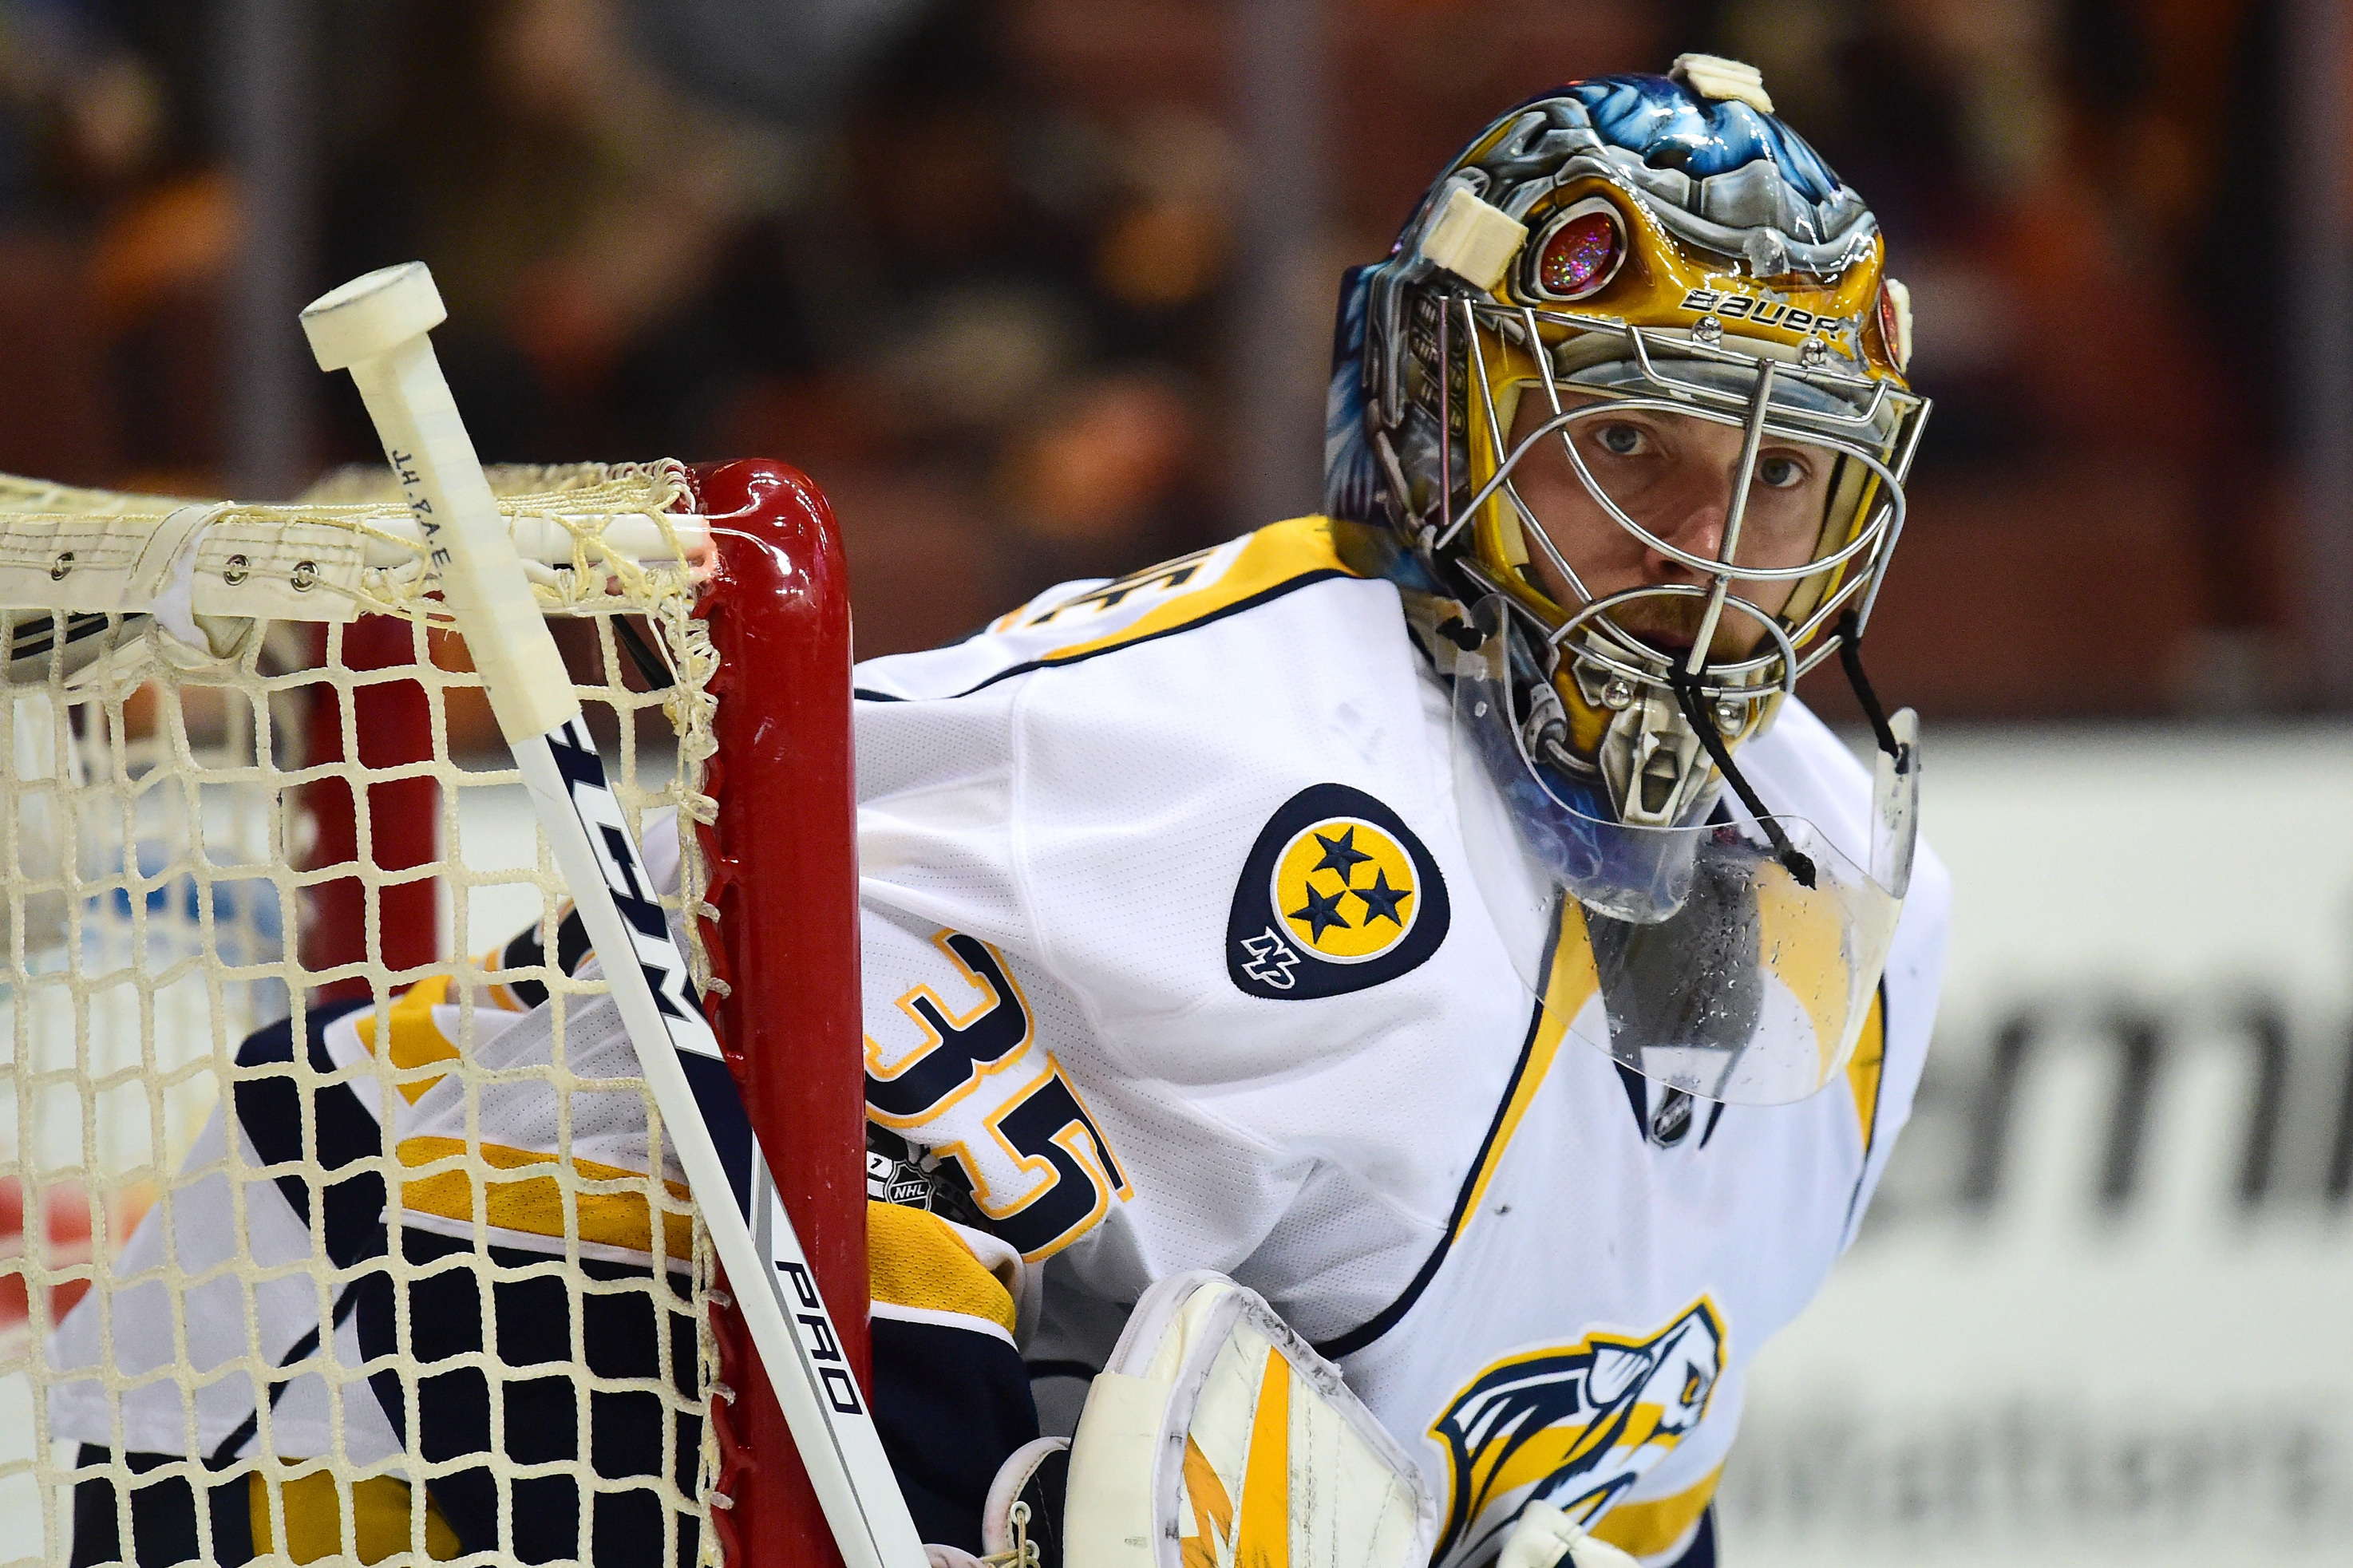 Minions are officially everywhere, including on NHL goalie masks